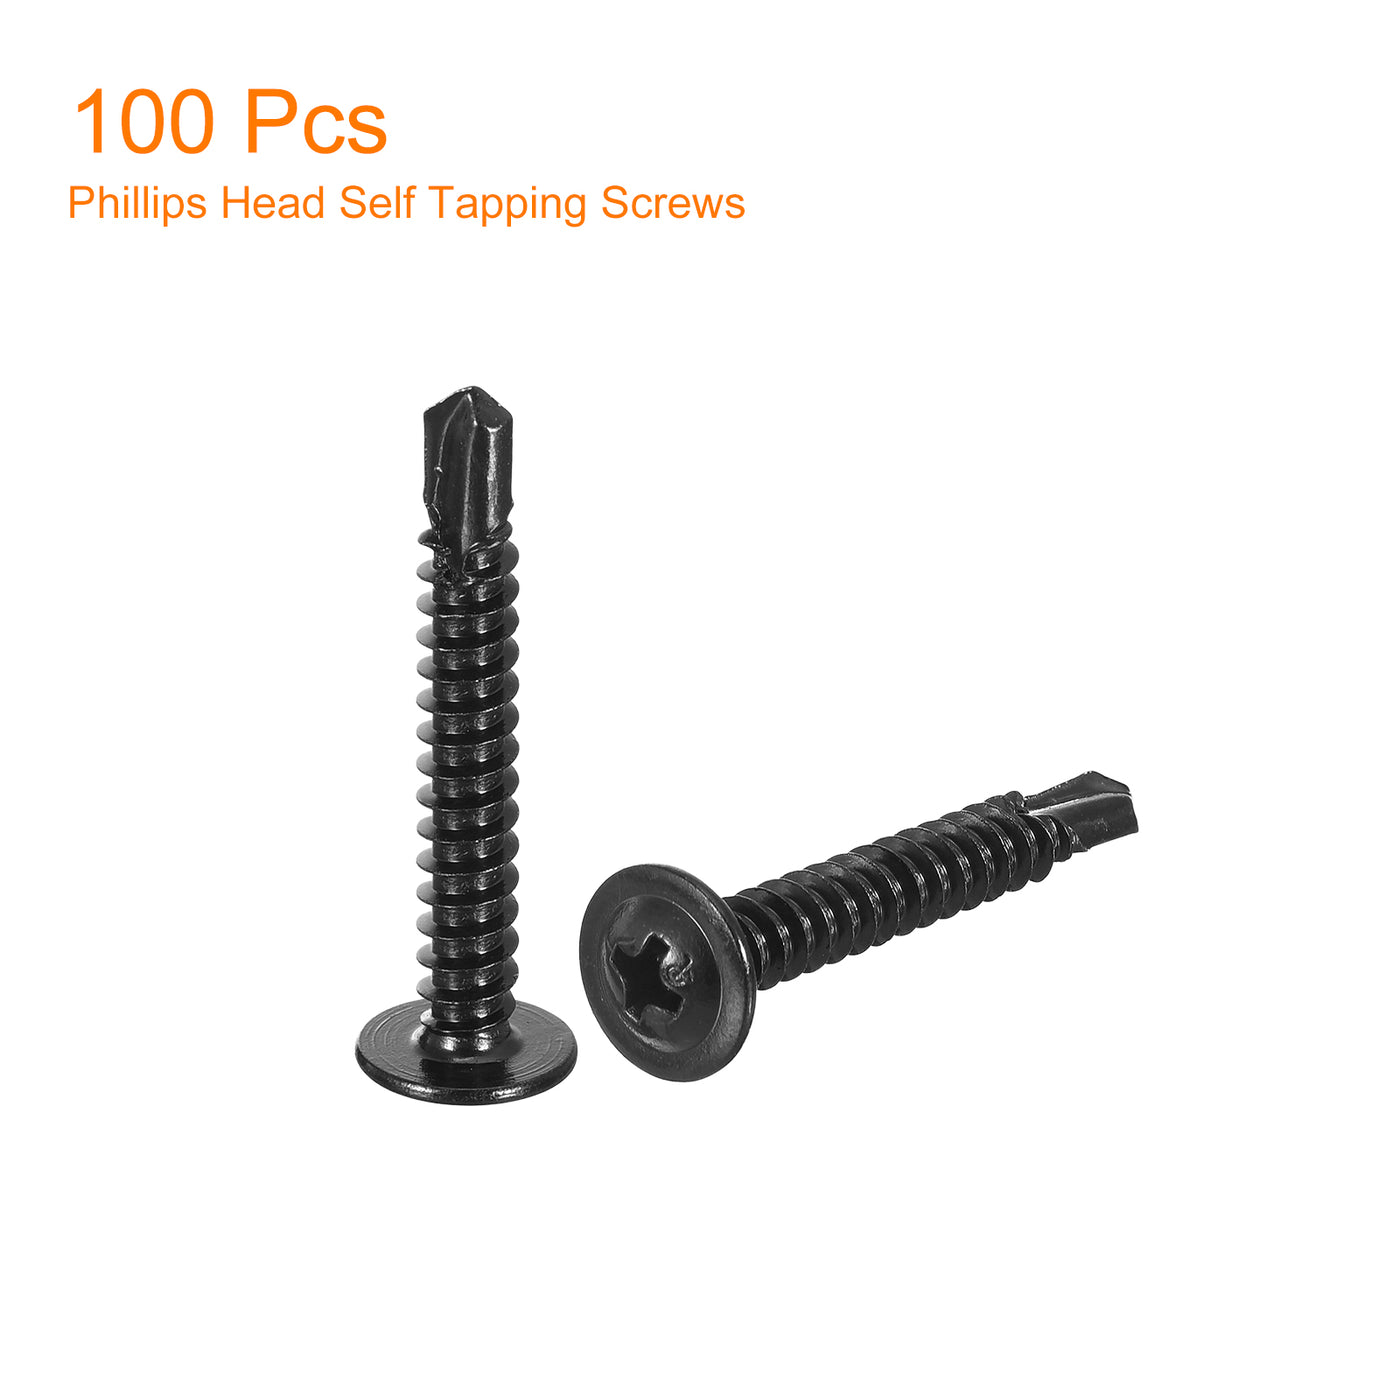 uxcell Uxcell Phillips Head Self Tapping Screws, 100pcs #10x1-1/4" Sheet Metal Screw